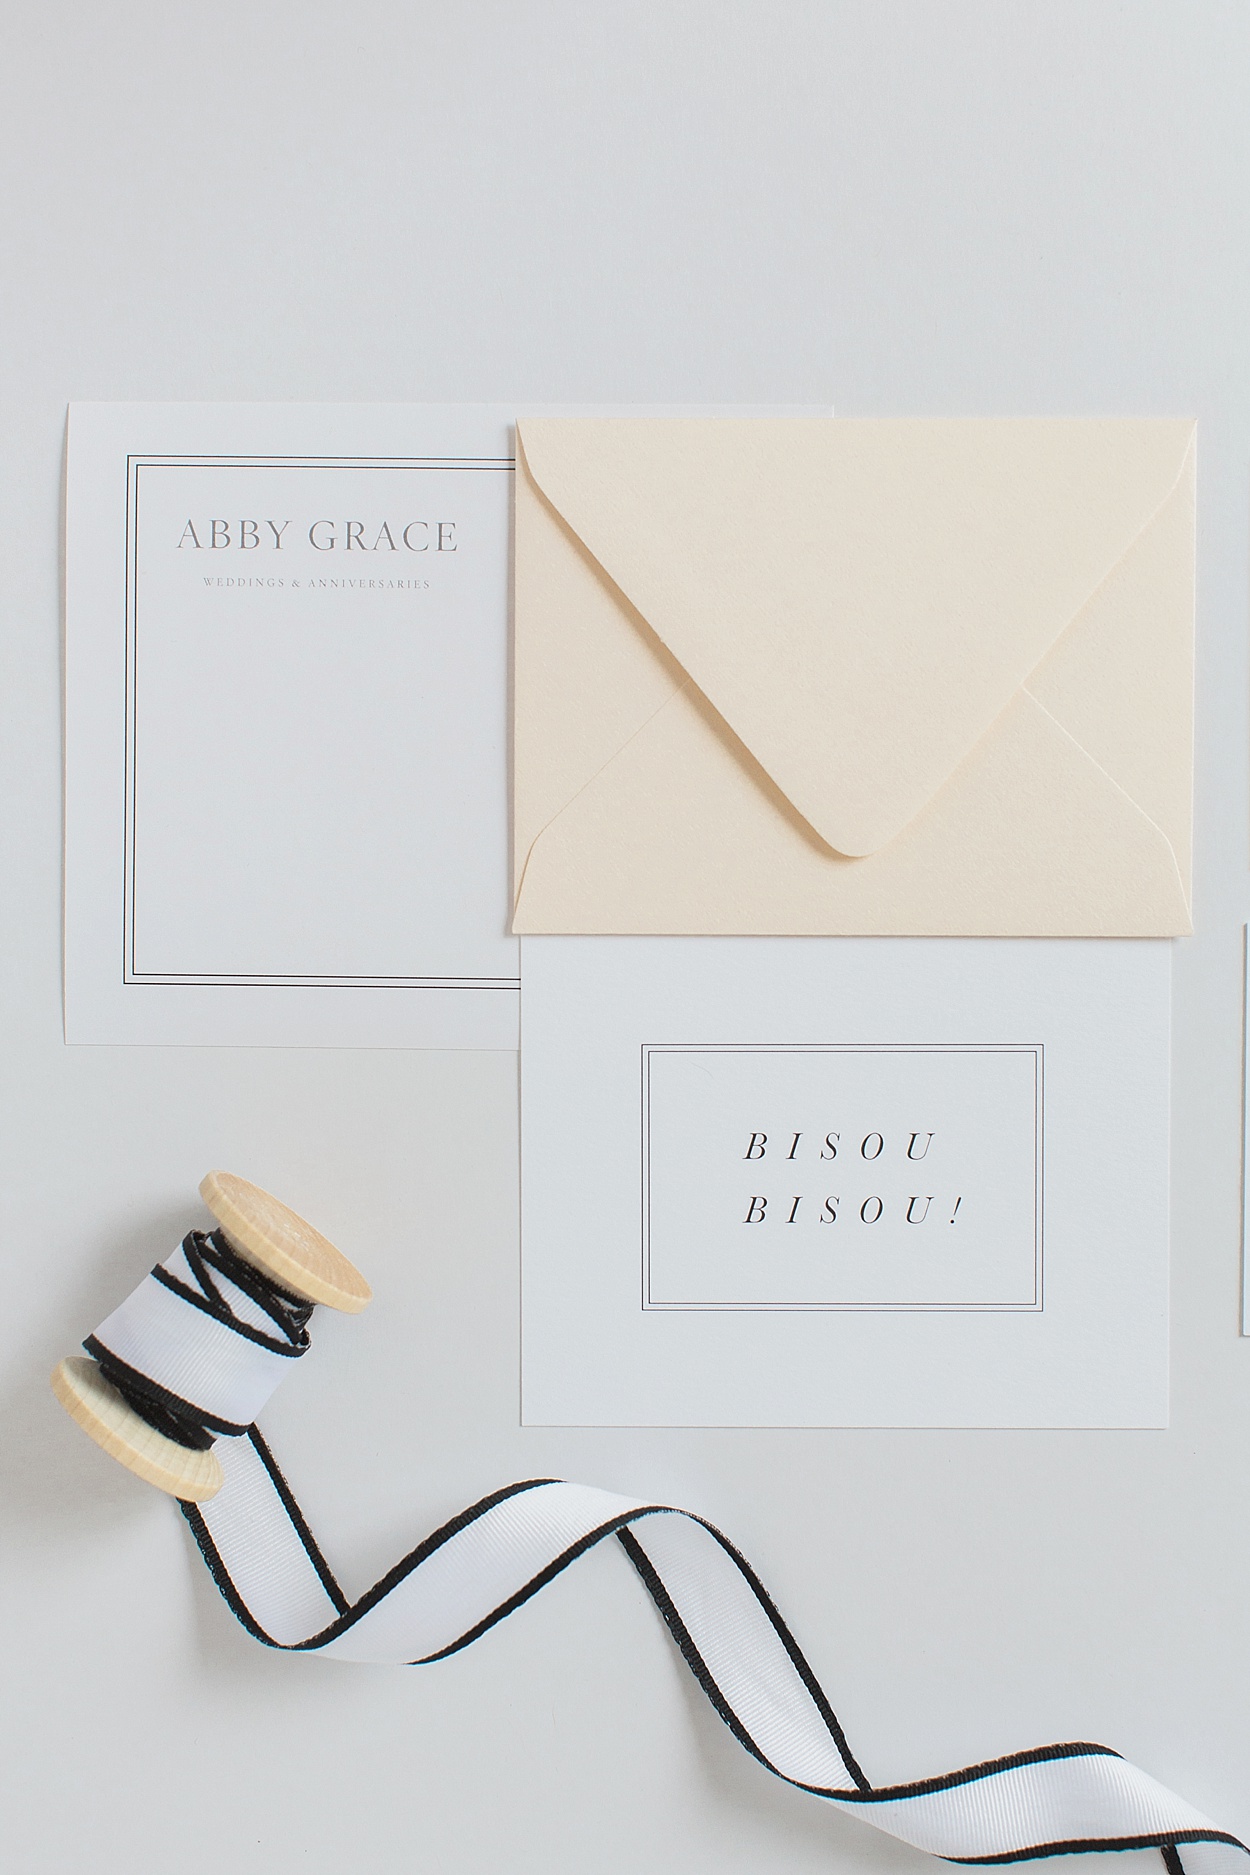 The importance of branded paper for photographers | Abby Grace